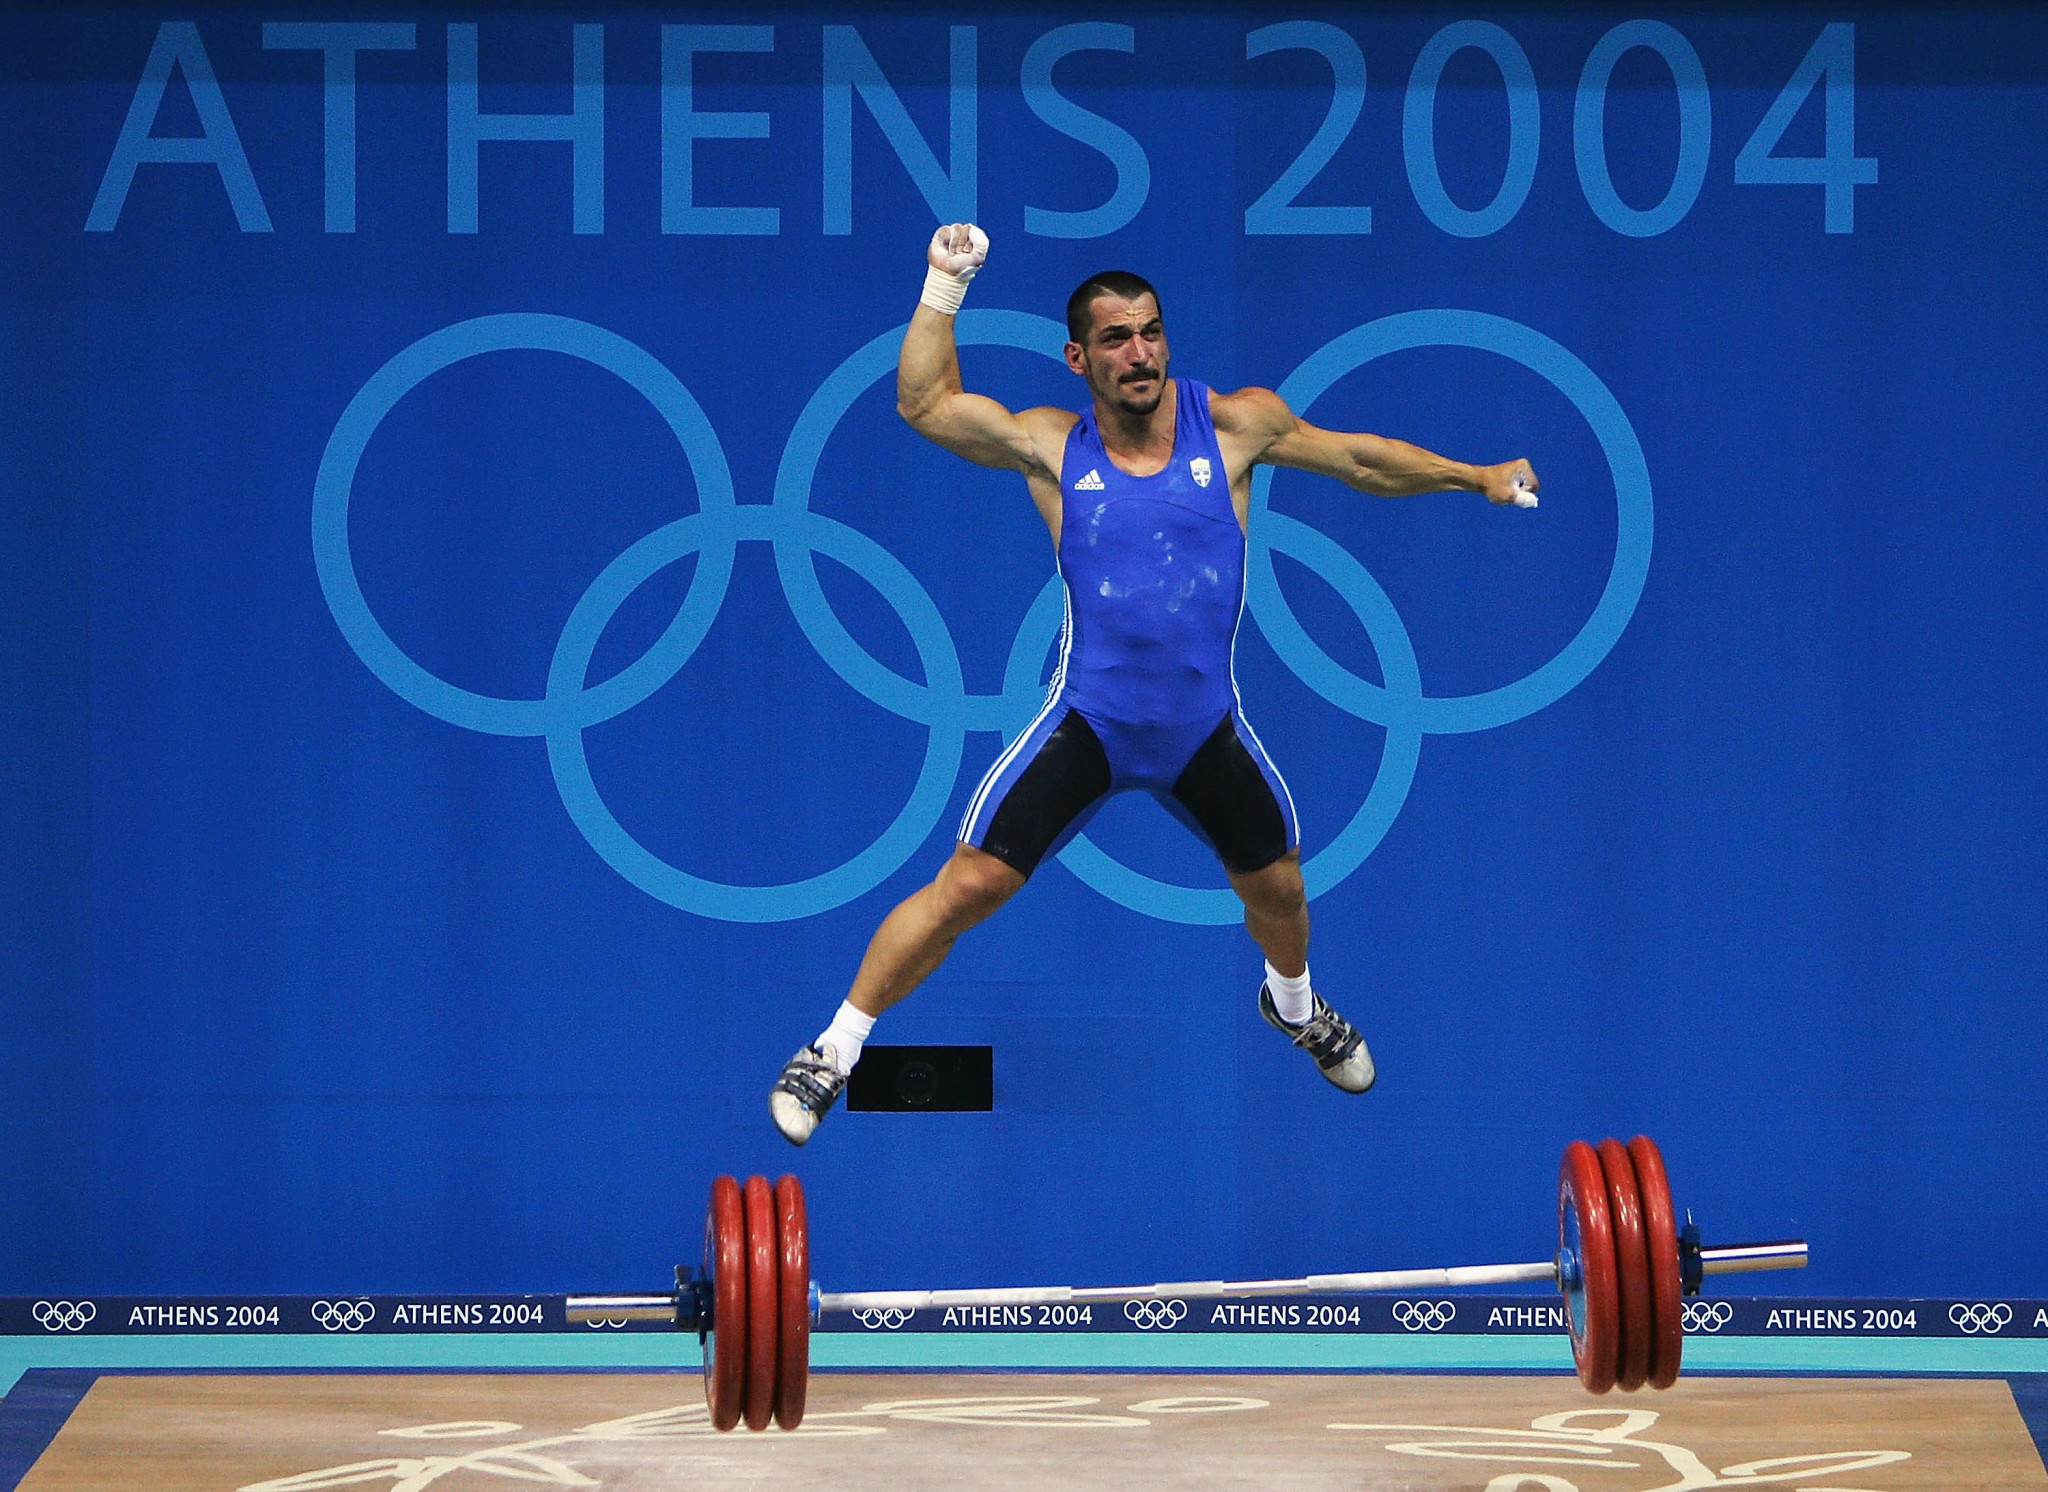 IWF stronger with Pyrros" says Irani after weightlifting hero stays in role